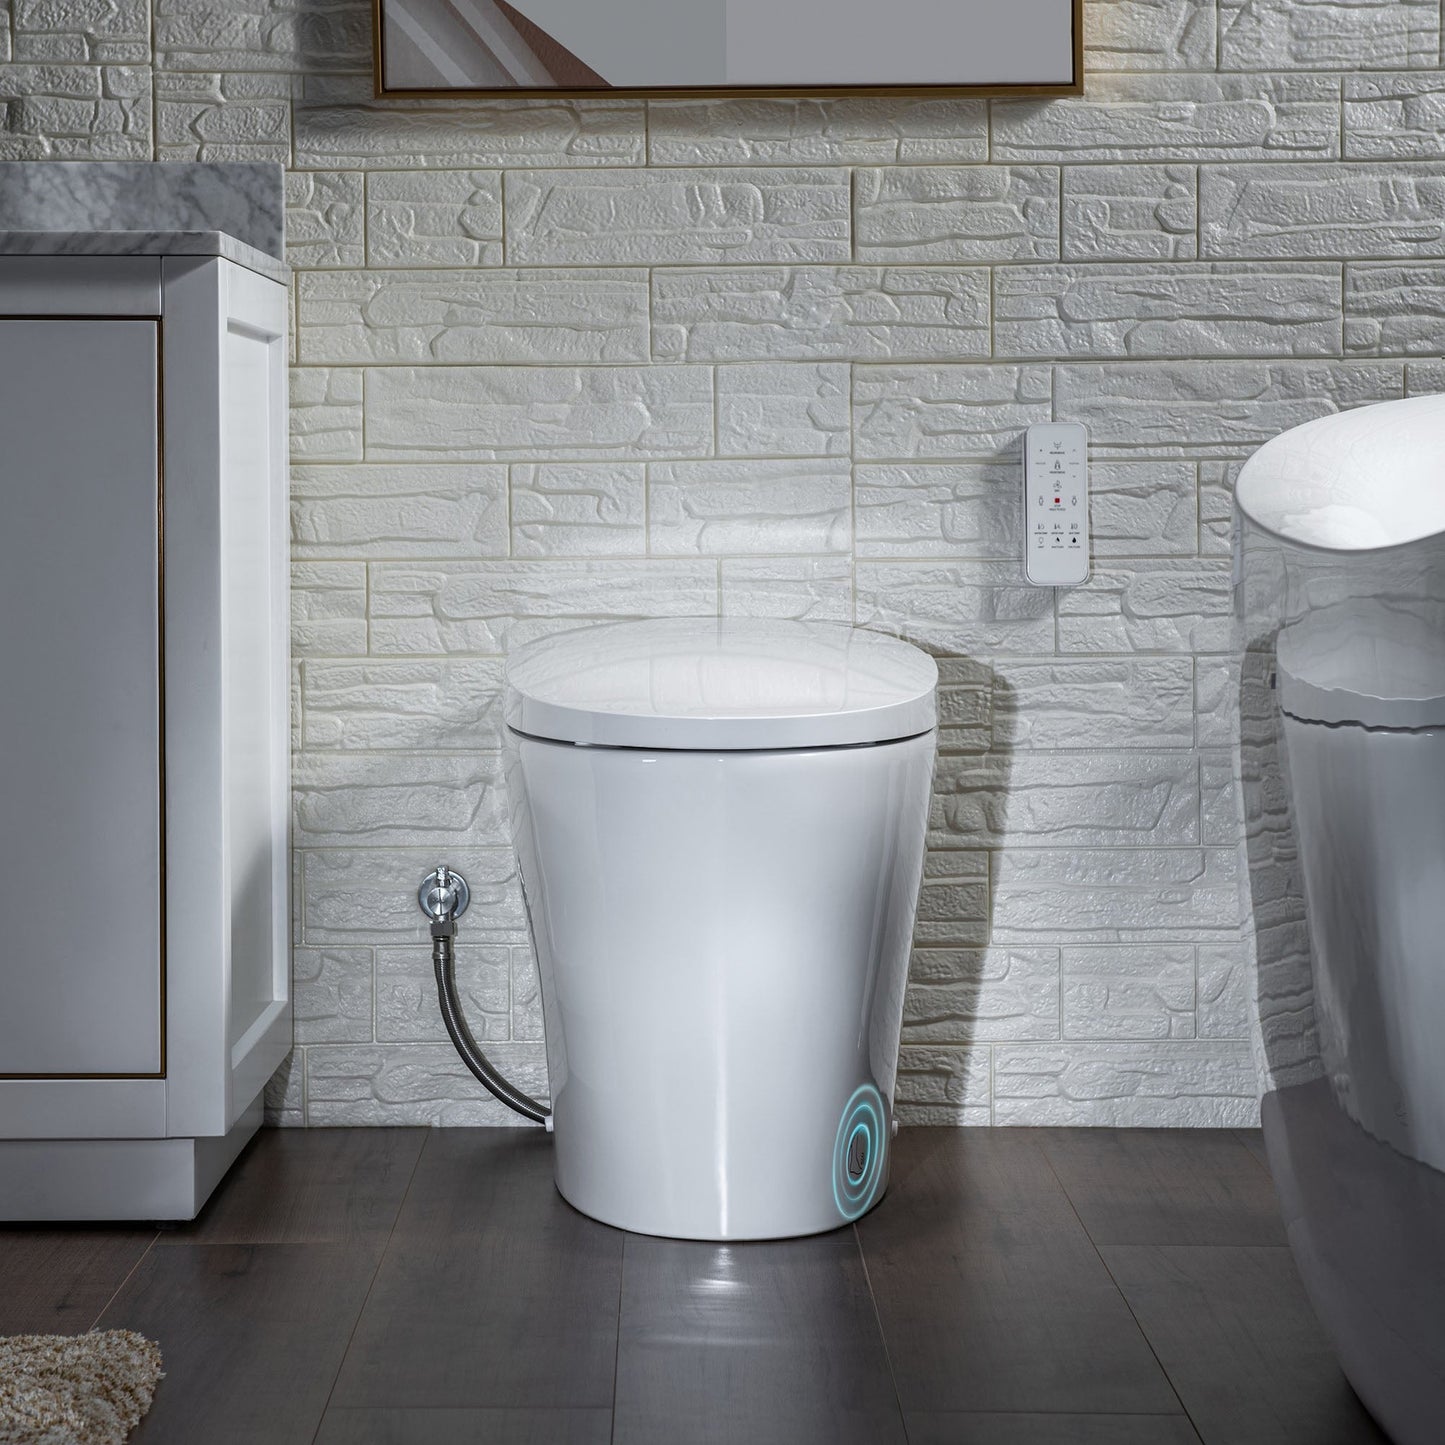 WoodBridge B0970S White Smart Bidet Tankless Toilet Elongated One Piece Chair Height, Auto Flush, Foot Sensor Operation, Heated Seat With Integrated Multi Function Remote Control